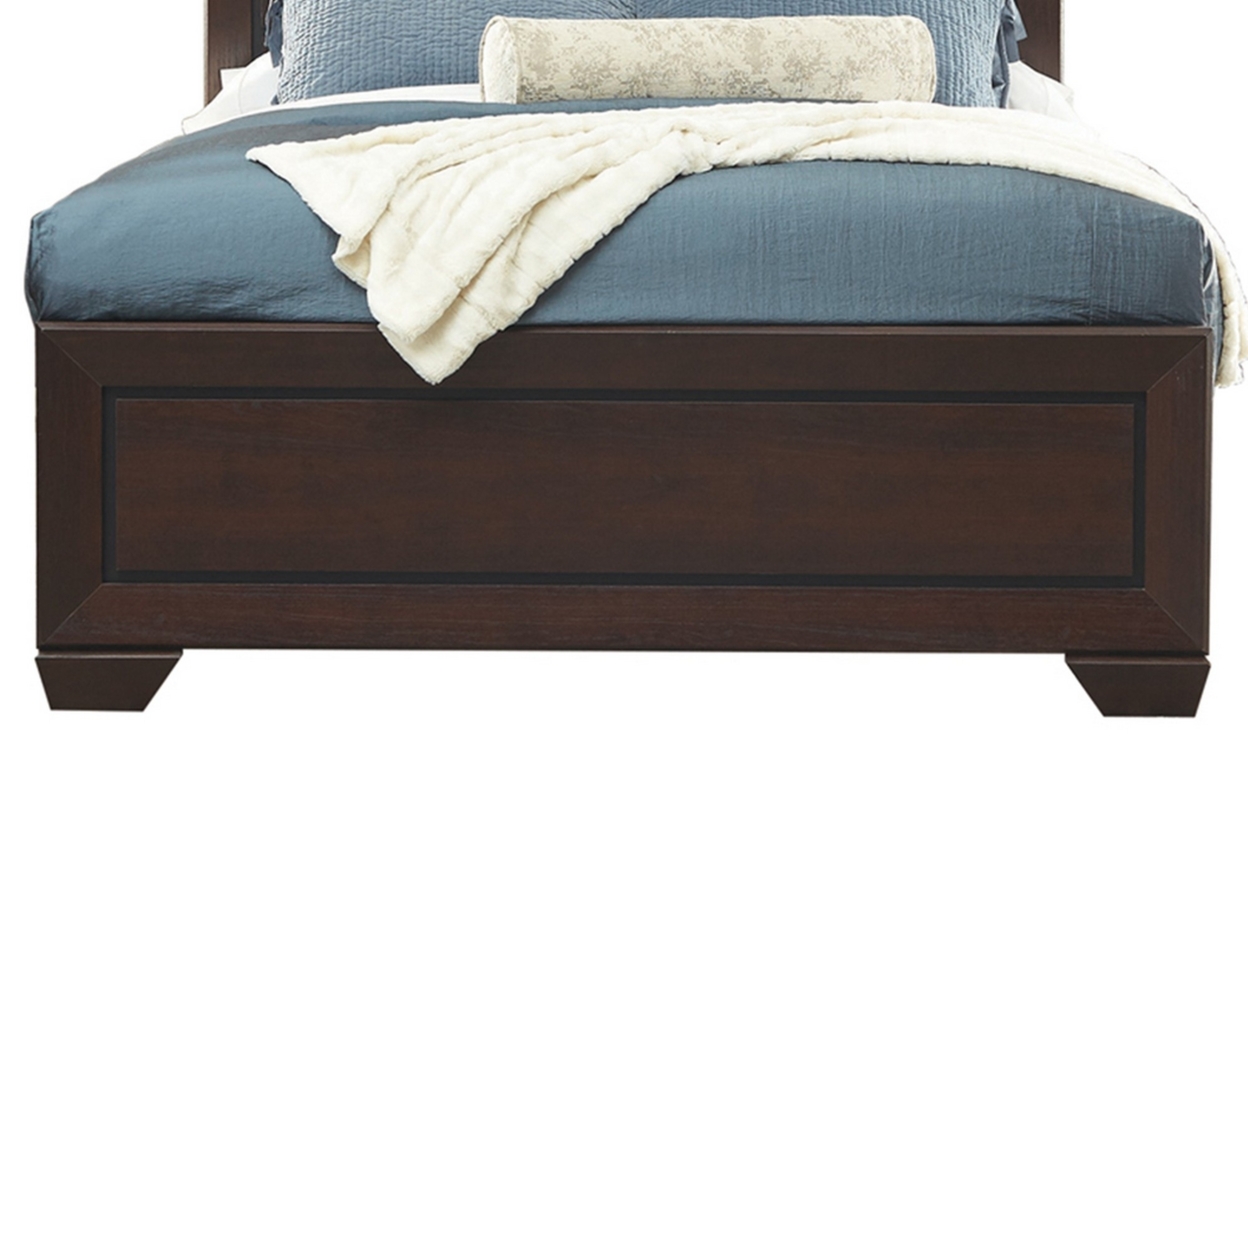 Queen Size Bed With Panel Headboard And Footboard, Cocoa Brown- Saltoro Sherpi